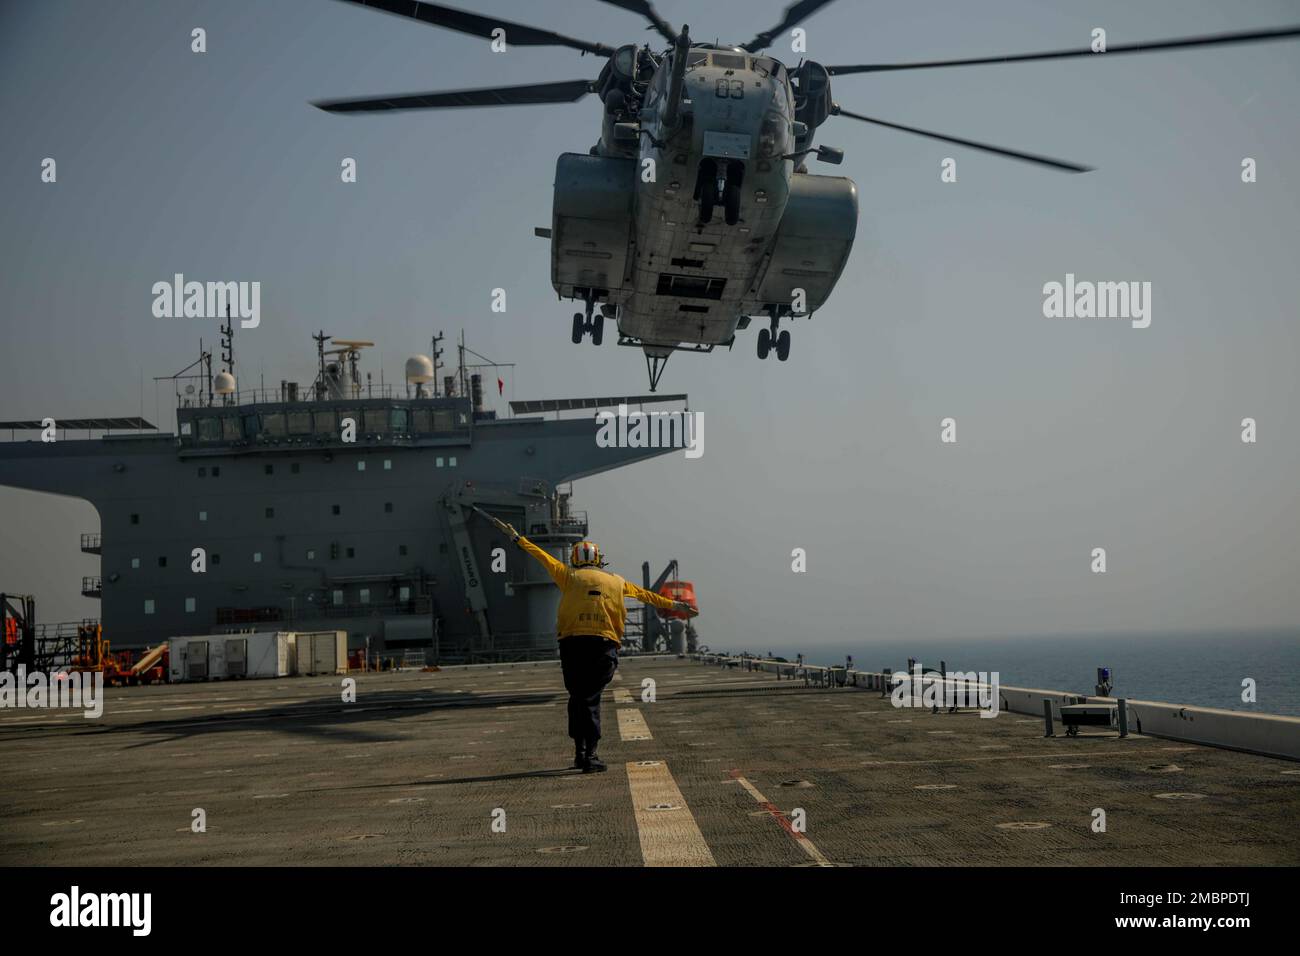 220618-A-EQ028-1350 ARABIAN GULF (June 18, 2022) Aviation Boatswains Mate (Handler) 3rd Class Lauren Bryan directs an MH-53 Sea Dragon helicopter attached to the Blackhawks of Helicopter Mine Countermeasures (HM) Squadron 15, during flight operations aboard the expeditionary sea base USS Lewis B. Puller (ESB 3), during exercise Iron Defender in the Arabian Gulf, June 18. Iron Defender is an annual bilateral training event between U.S. Naval Forces Central Command and forces from the United Arab Emirates. The exercise focuses on maritime security operations, mine countermeasures, and harbor def Stock Photo